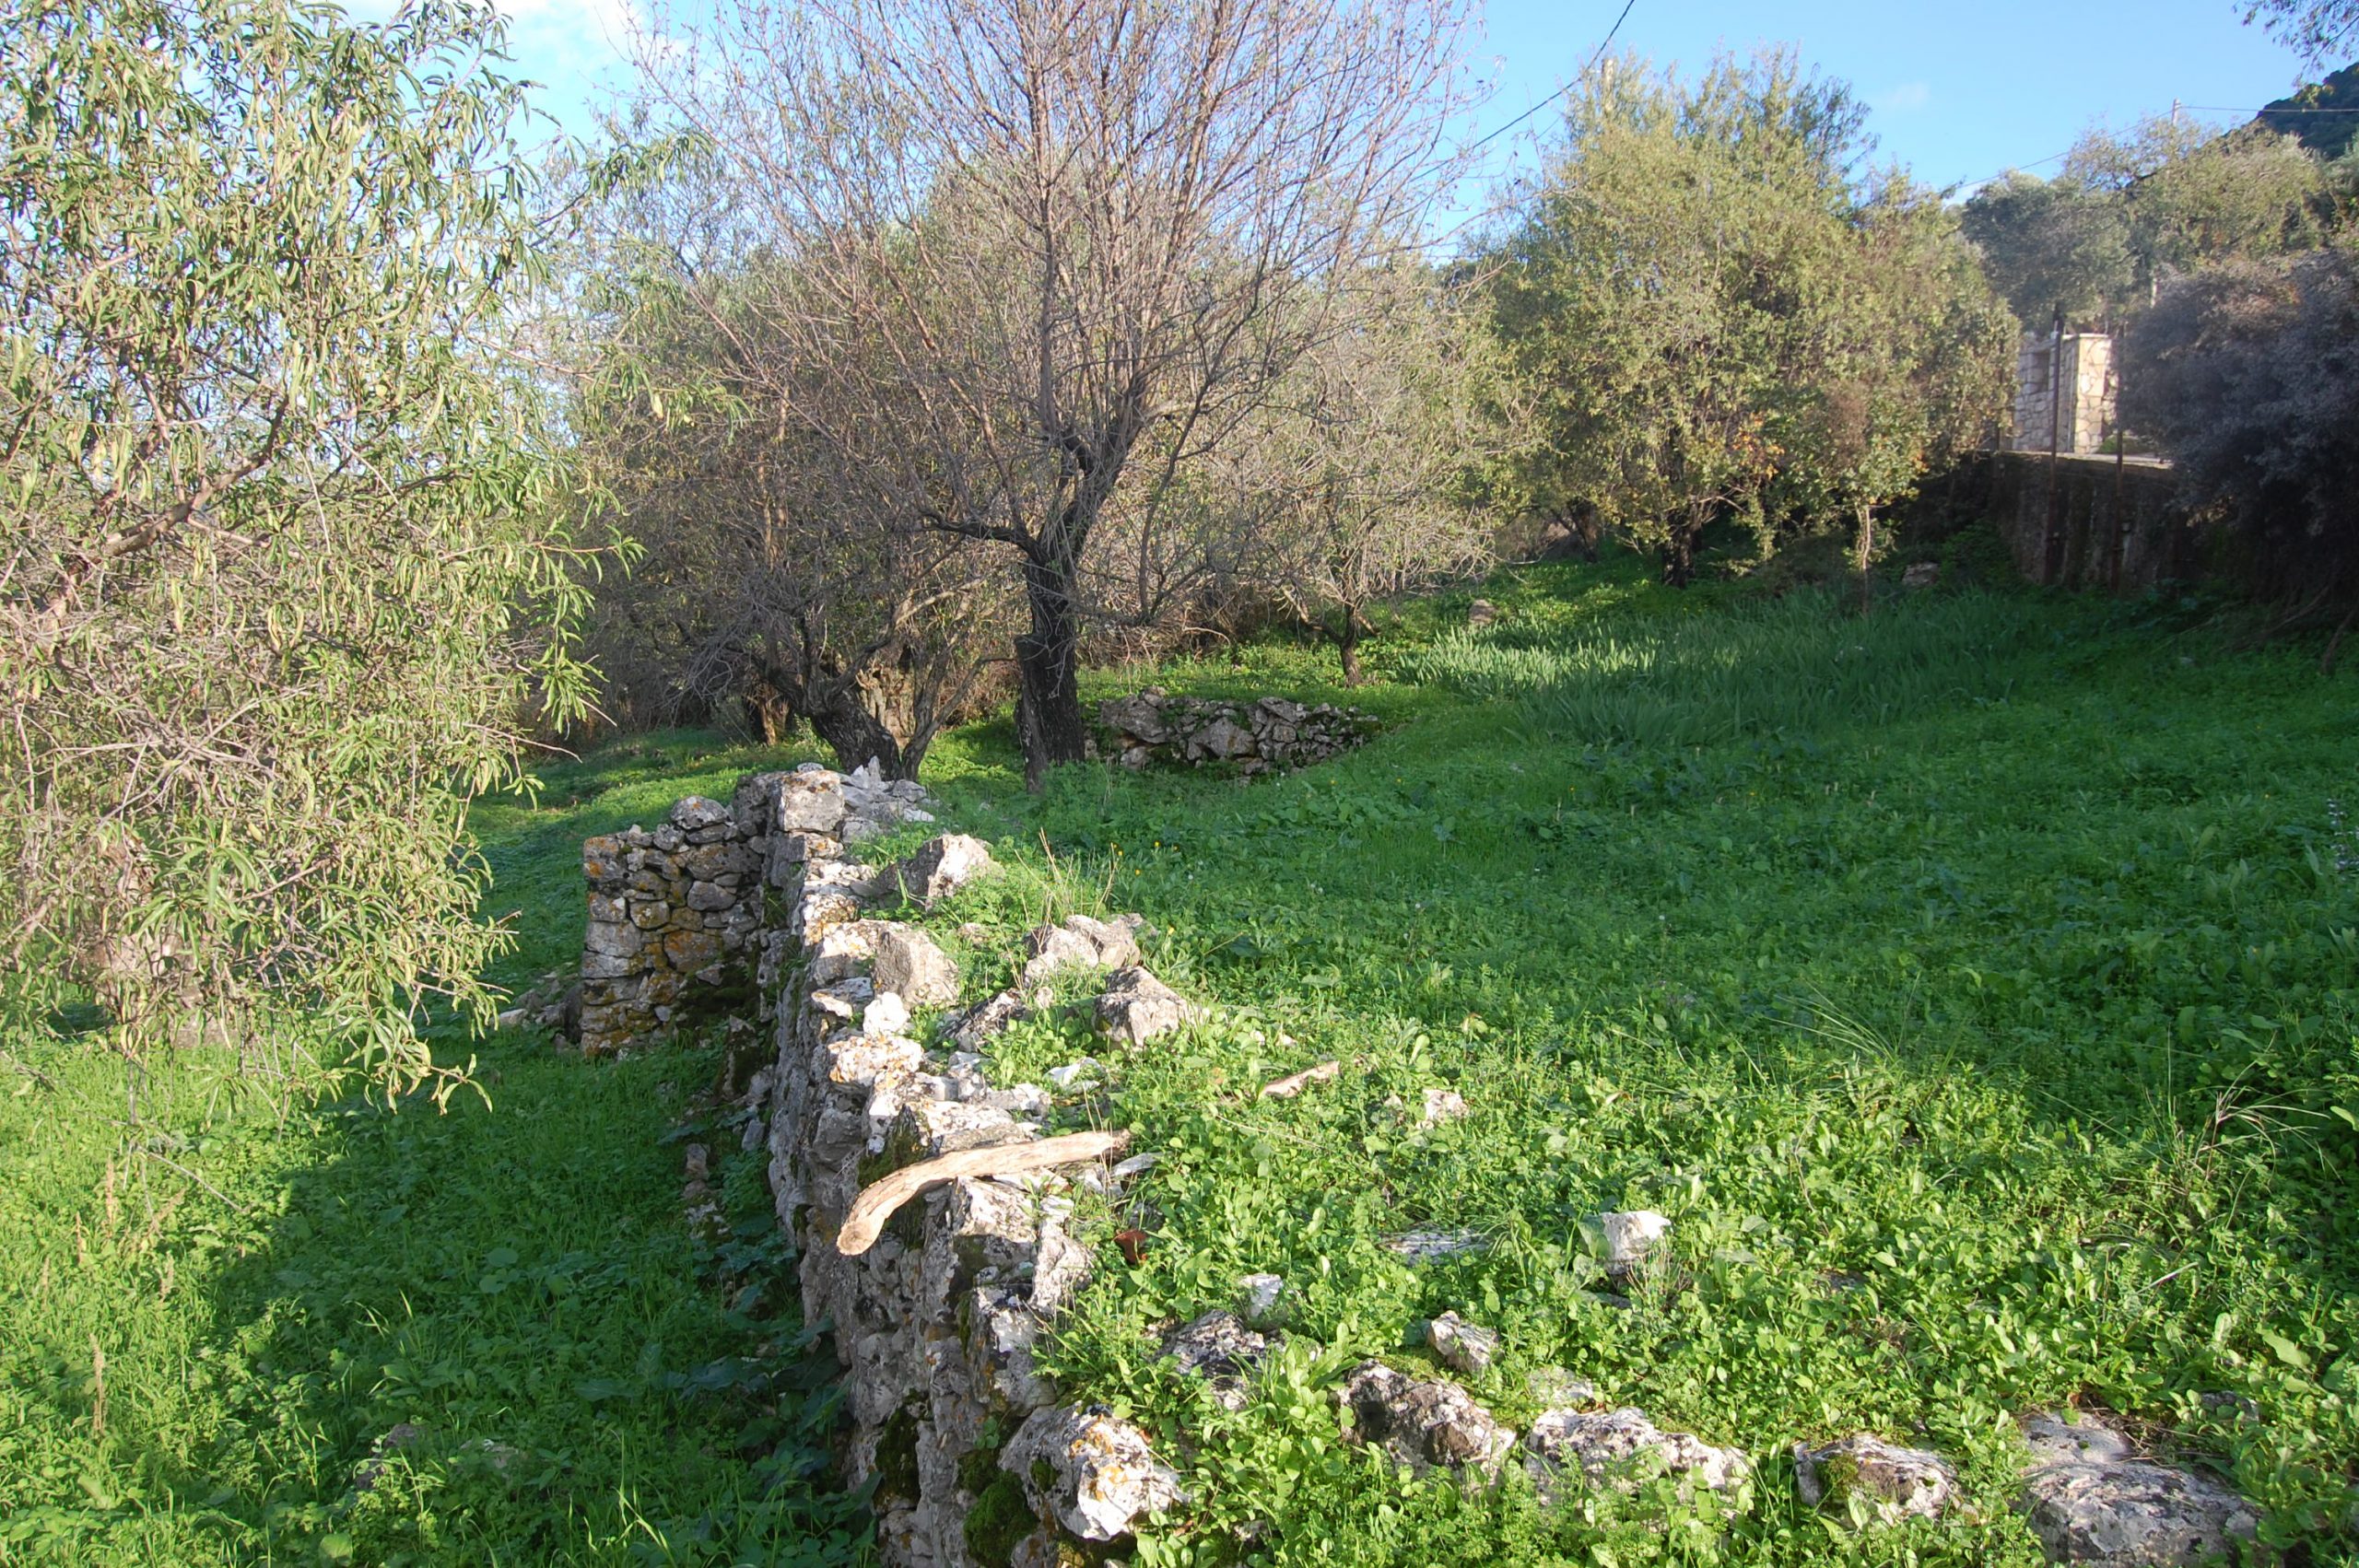 Terrain of landscape of land for sale Ithaca Greece Stavros